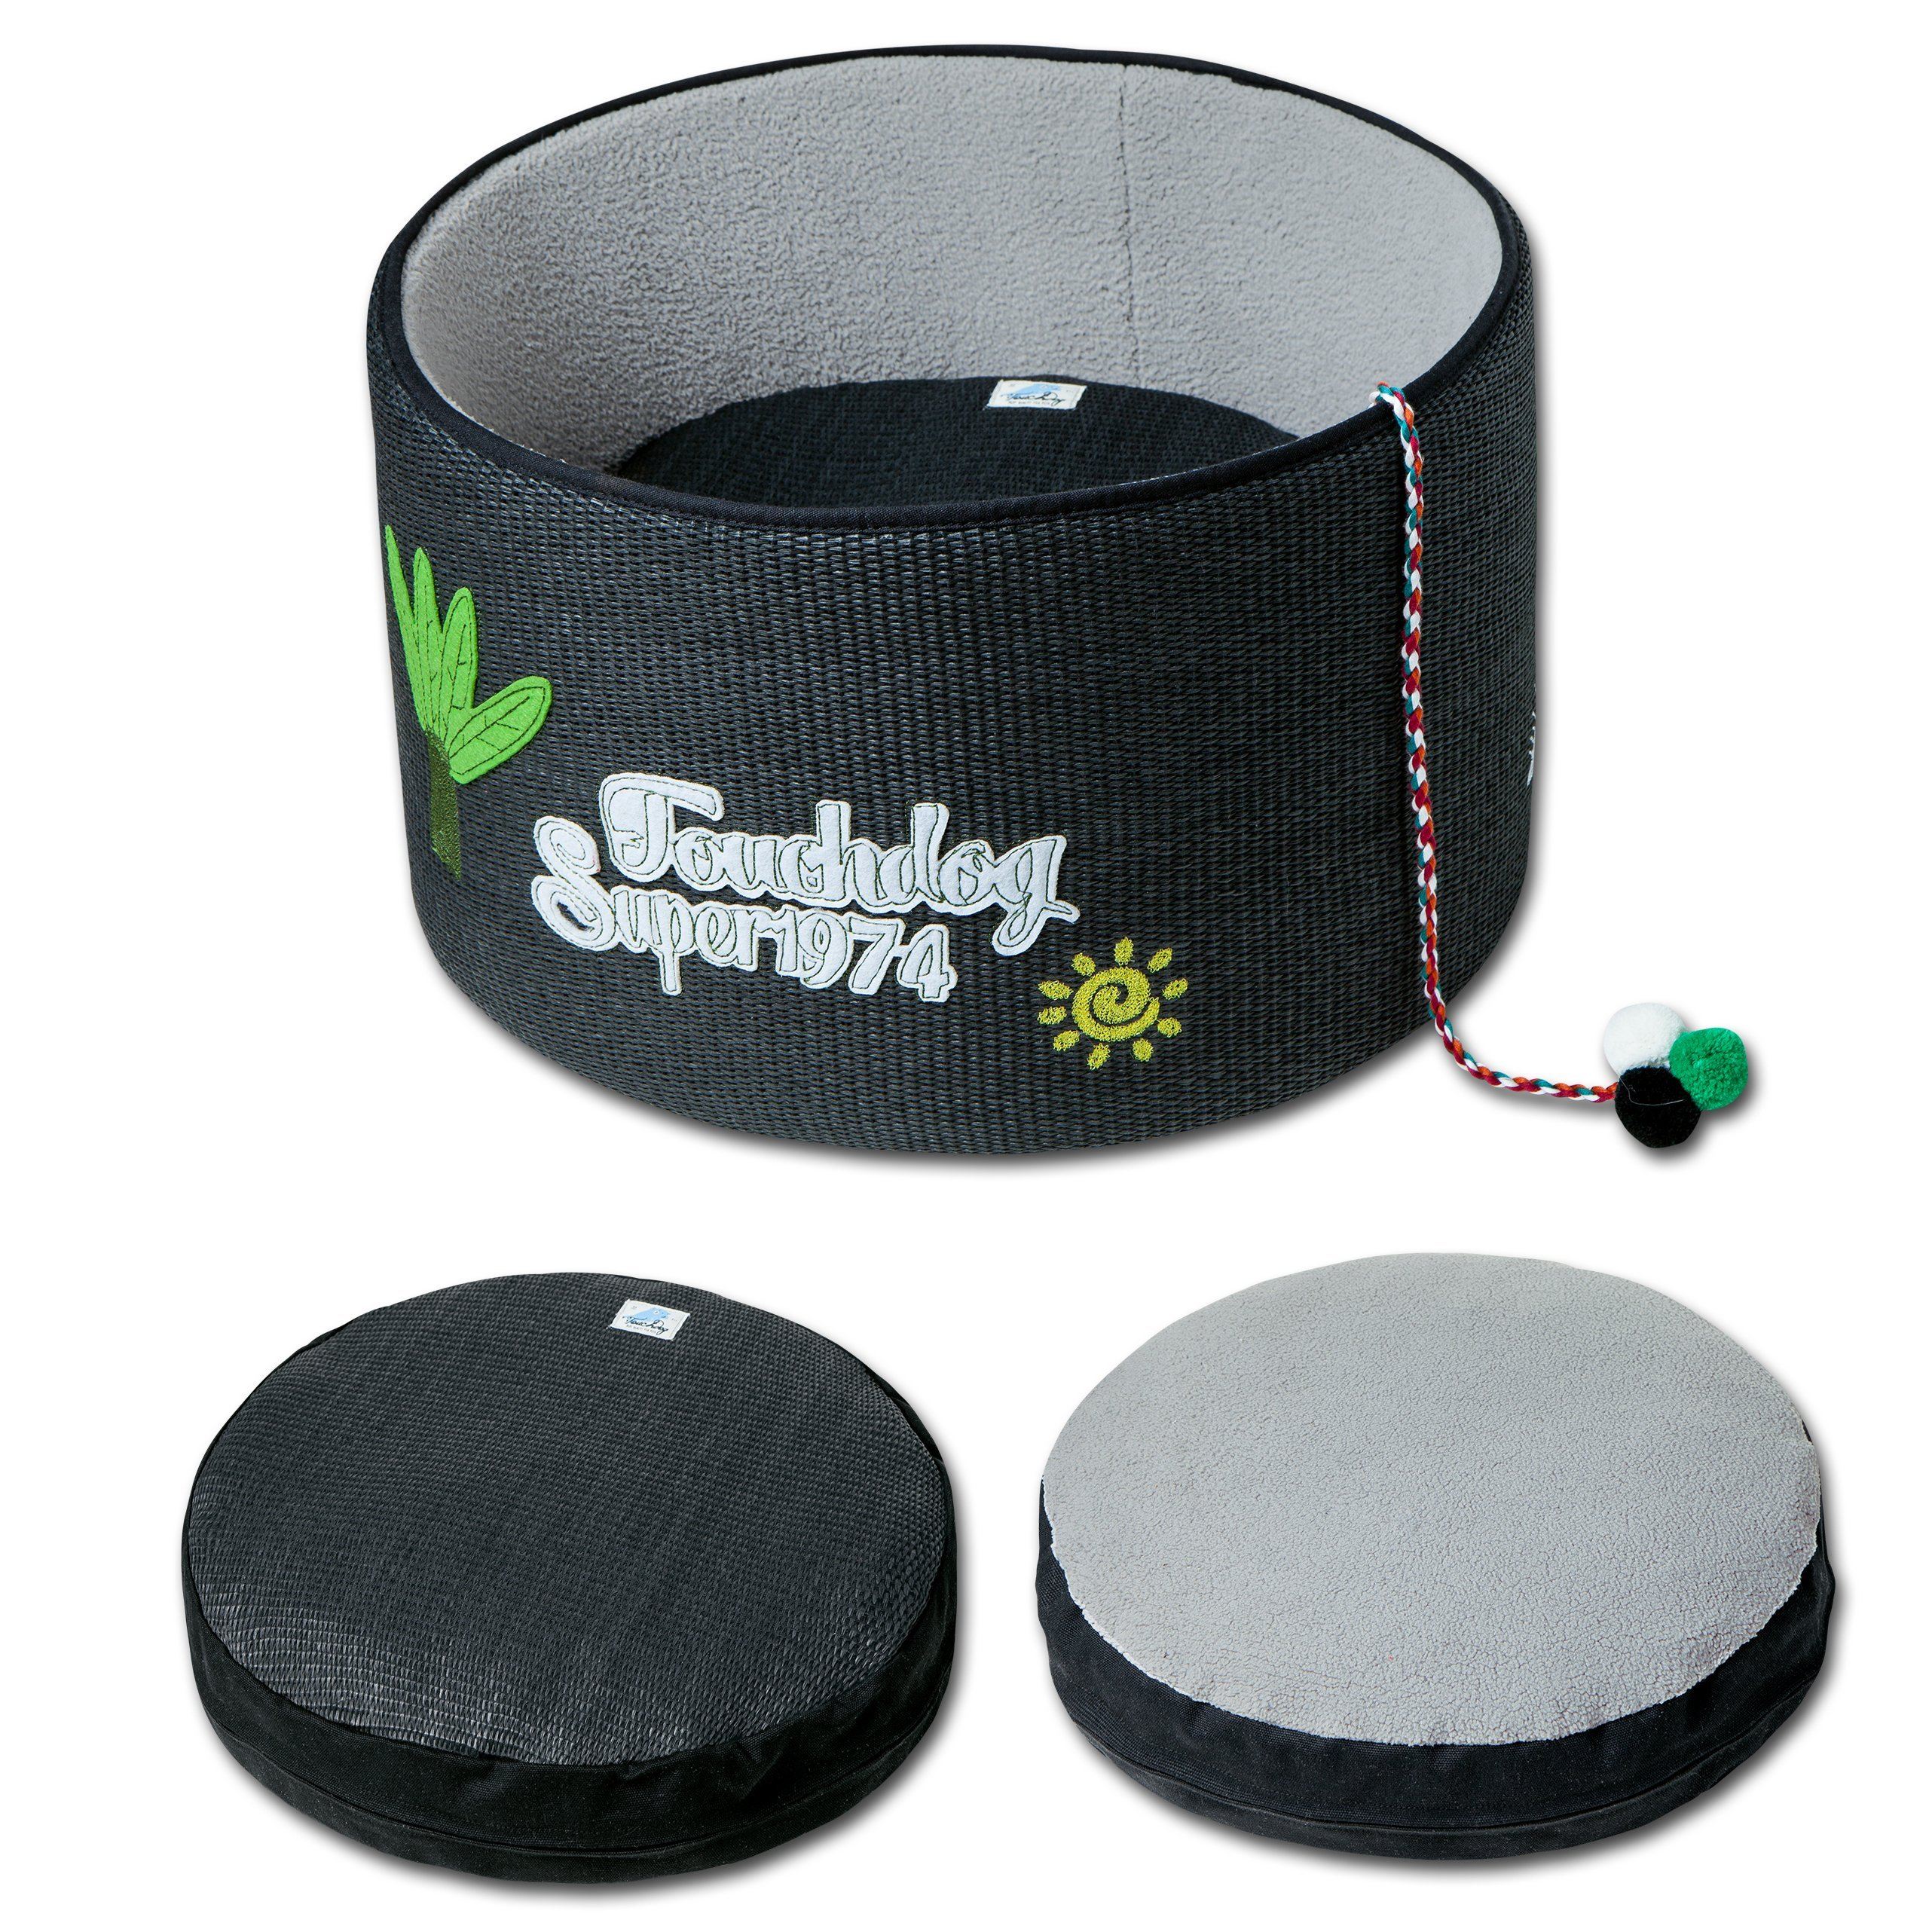 Touchcat 'Claw-ver Nest' Rounded Scratching Cat Bed w/ Teaser Toy  